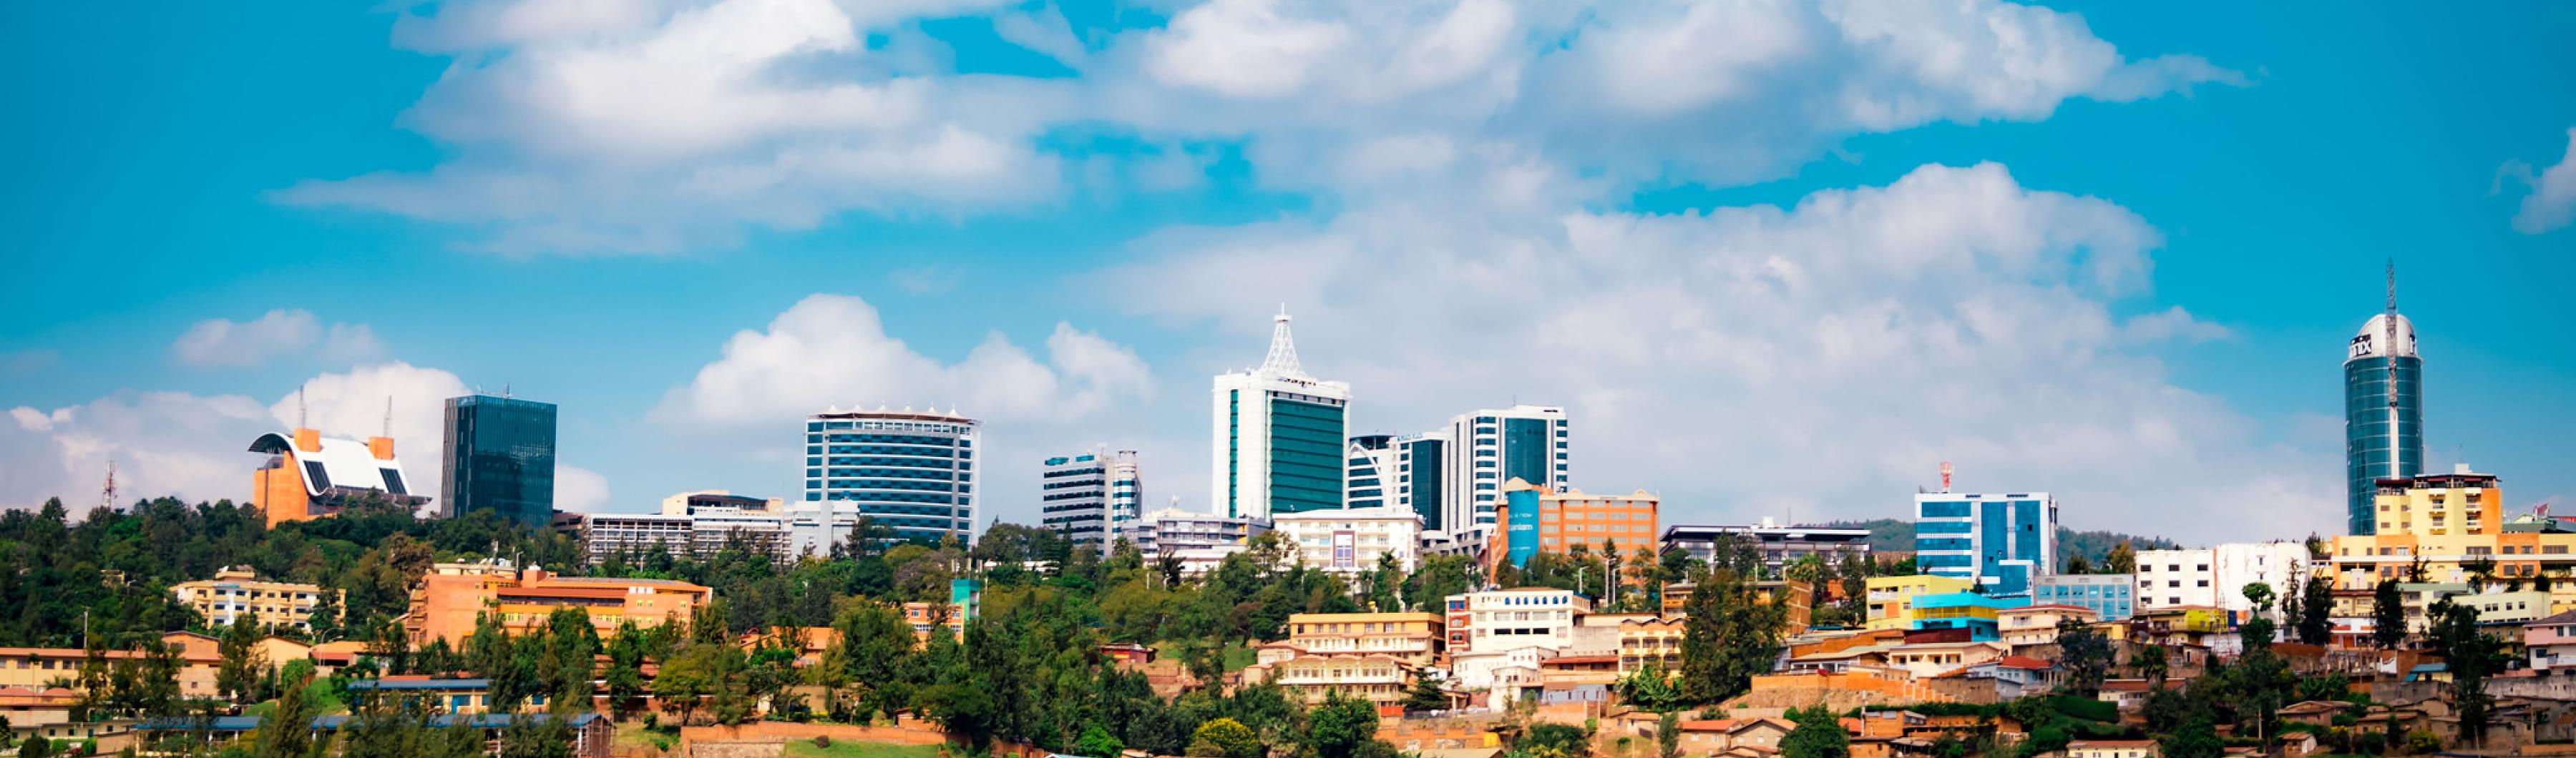 A view of downtown Kigali